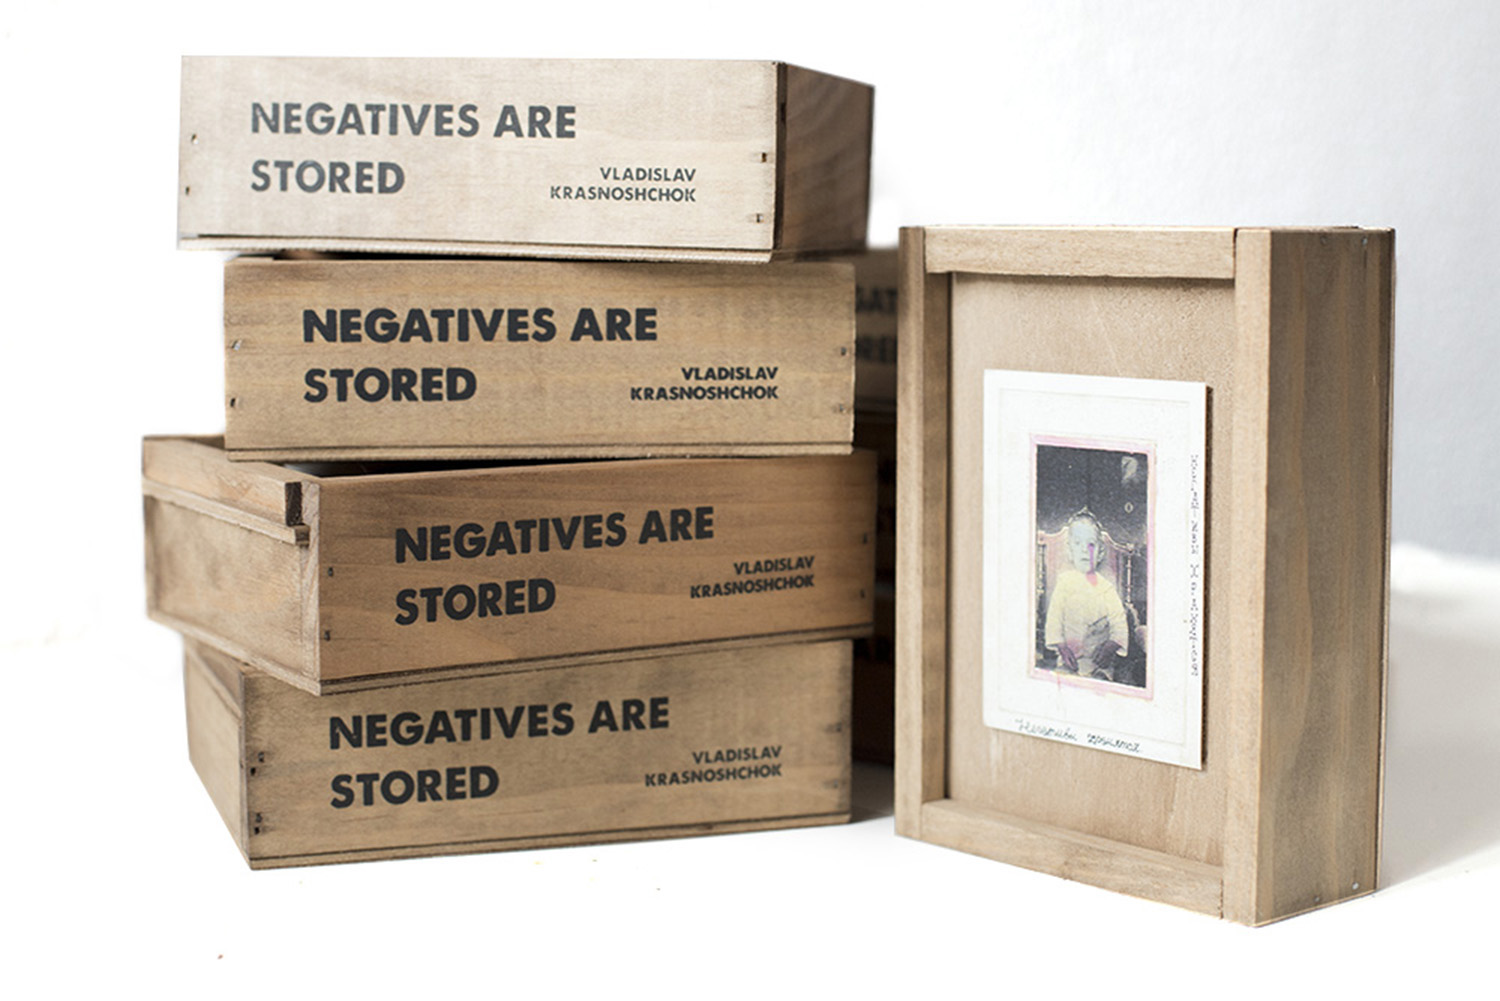 For Vladyslav Krasnoshchok's book <em>Negatives Are Stored</em>, the self-publishing company Riot Books created wooden boxes to store the images. (Riot Books)